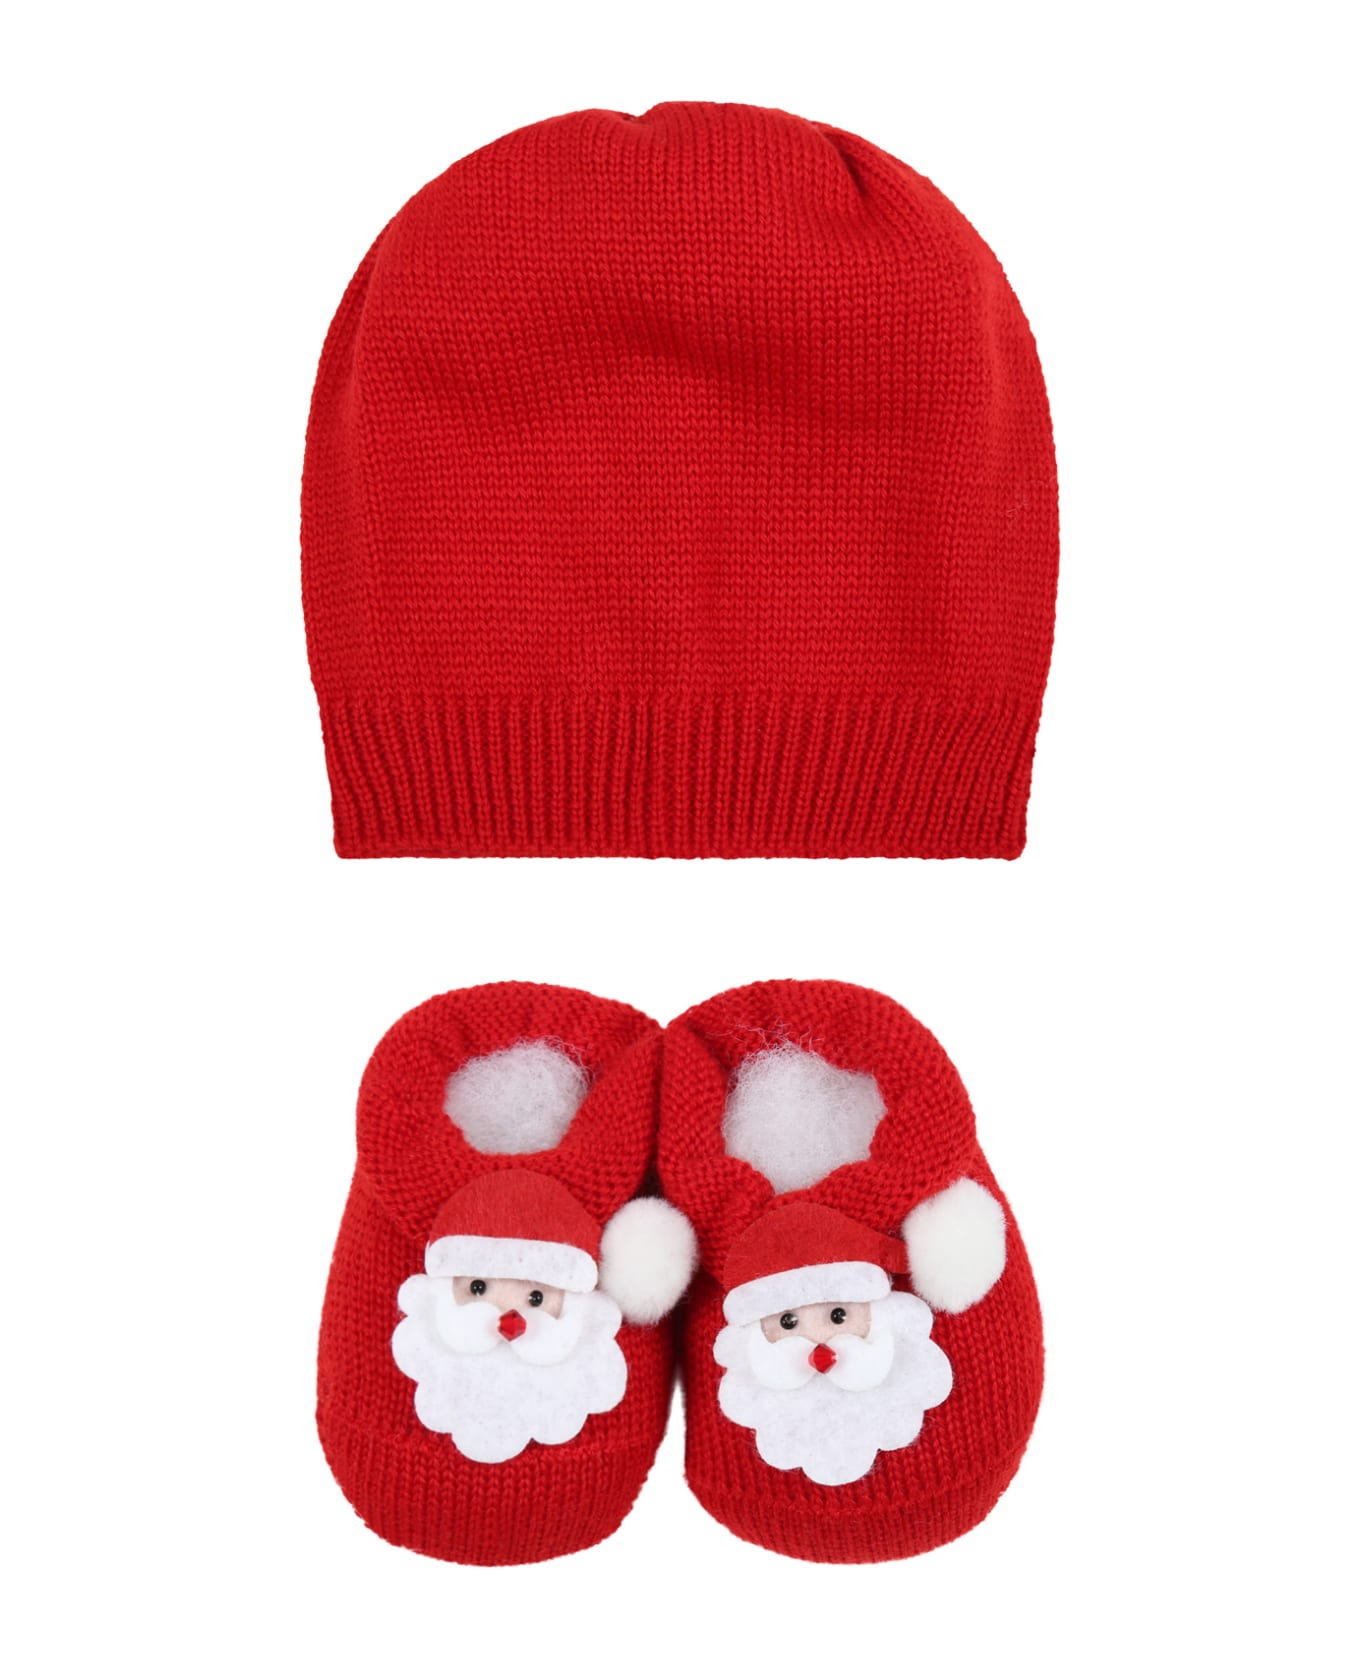 Story Loris Red Set For Babykids With Santa Claus - Red